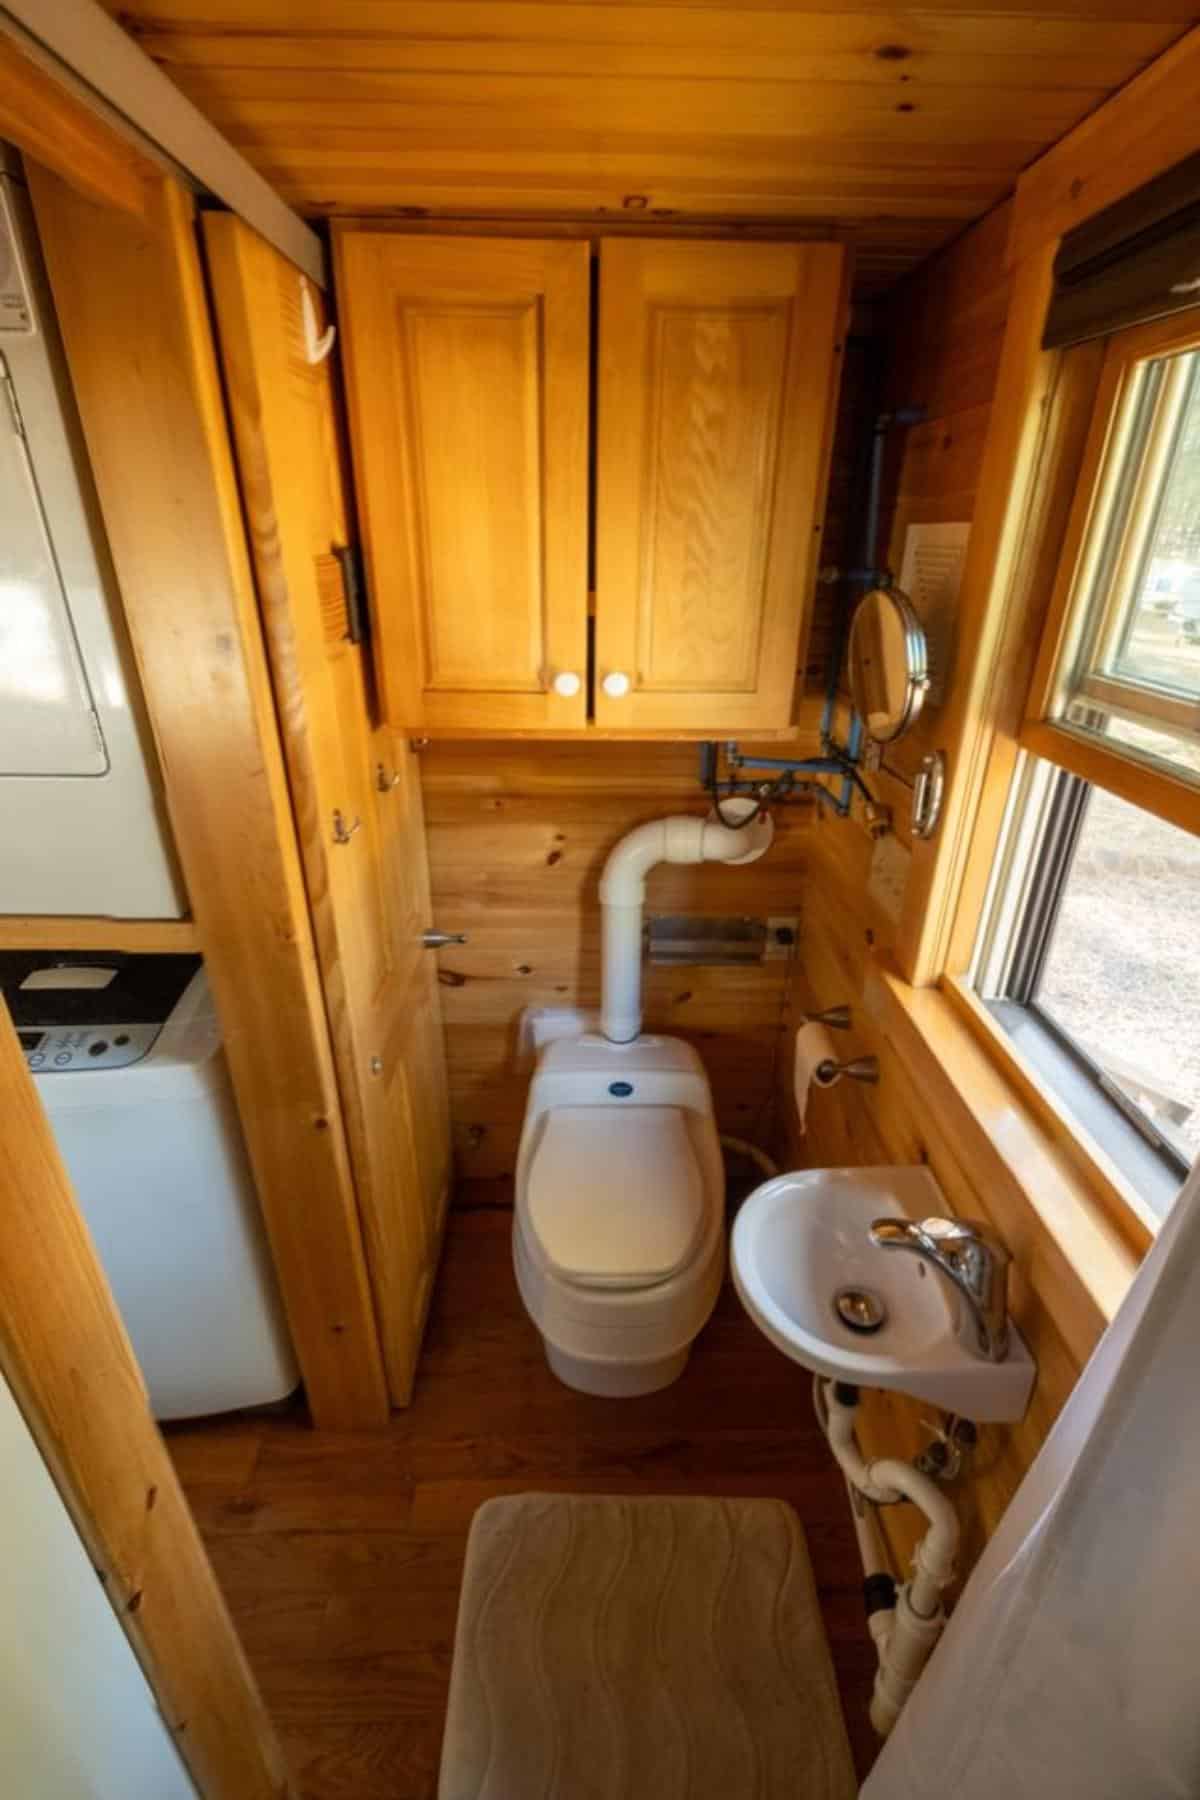 standard fittings in the bathroom with composting toilet